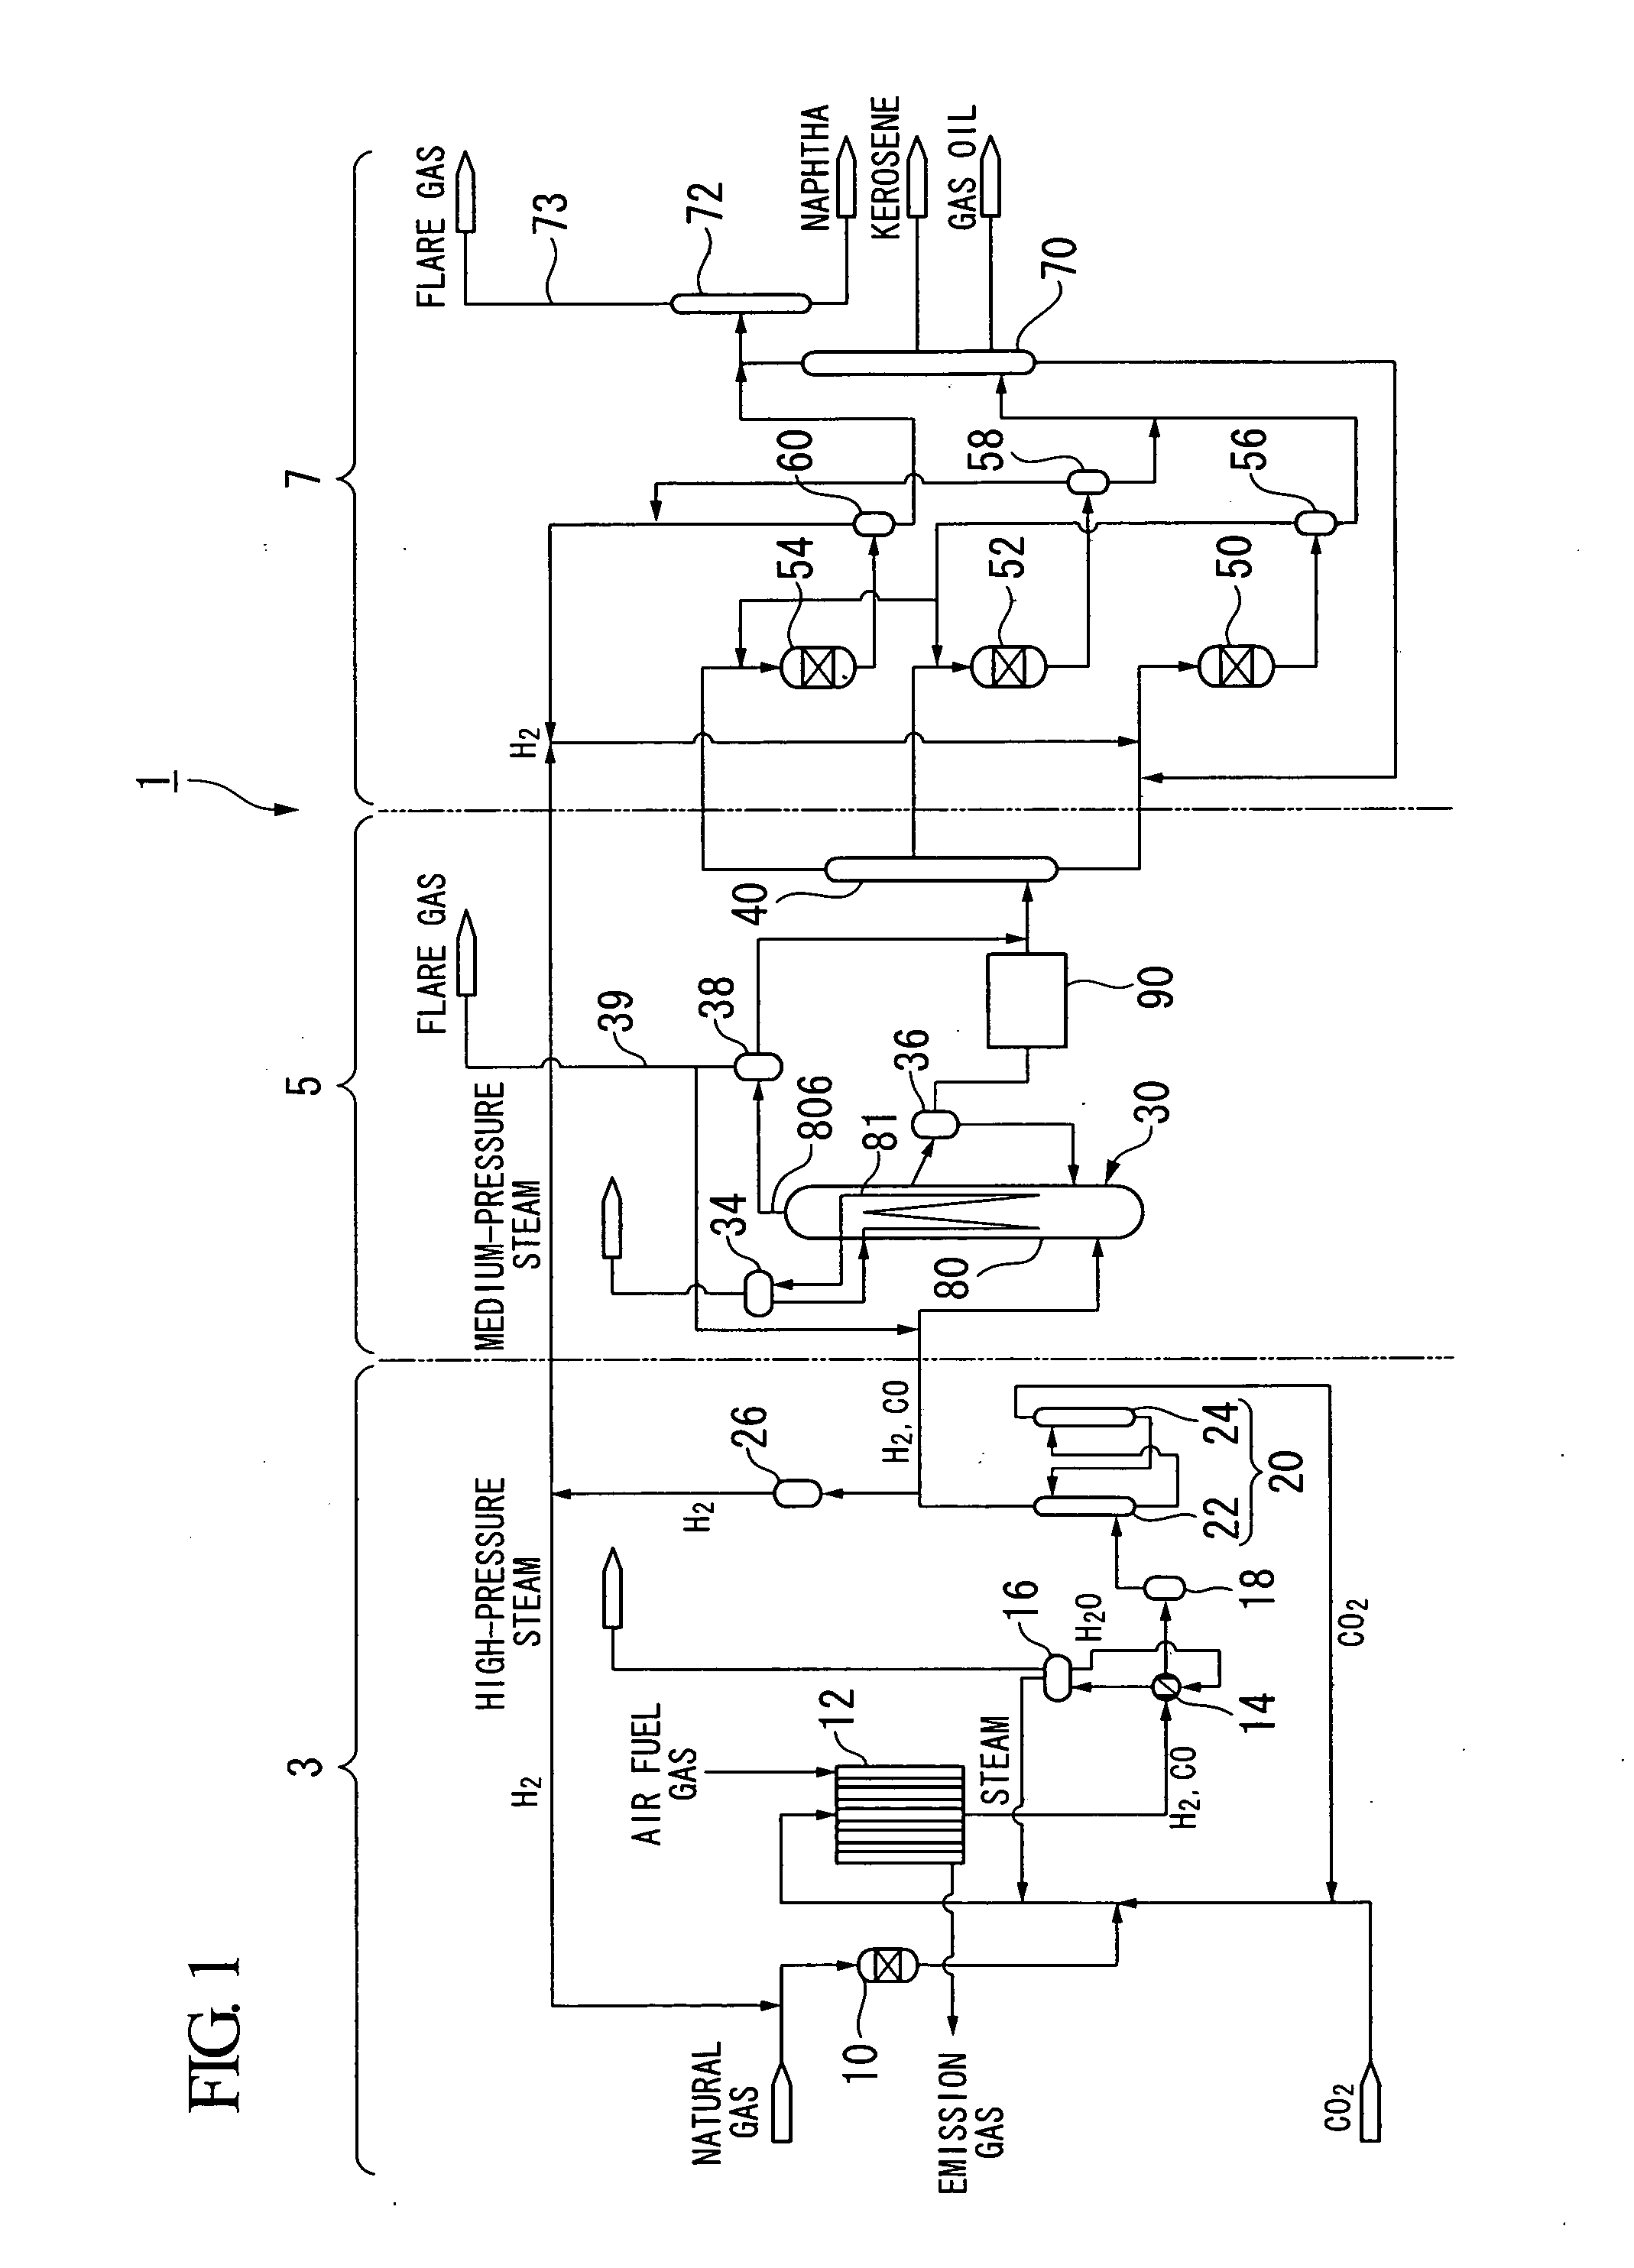 Synthesis reaction system for hydrocarbon compound, and method of removing powdered catalyst particles